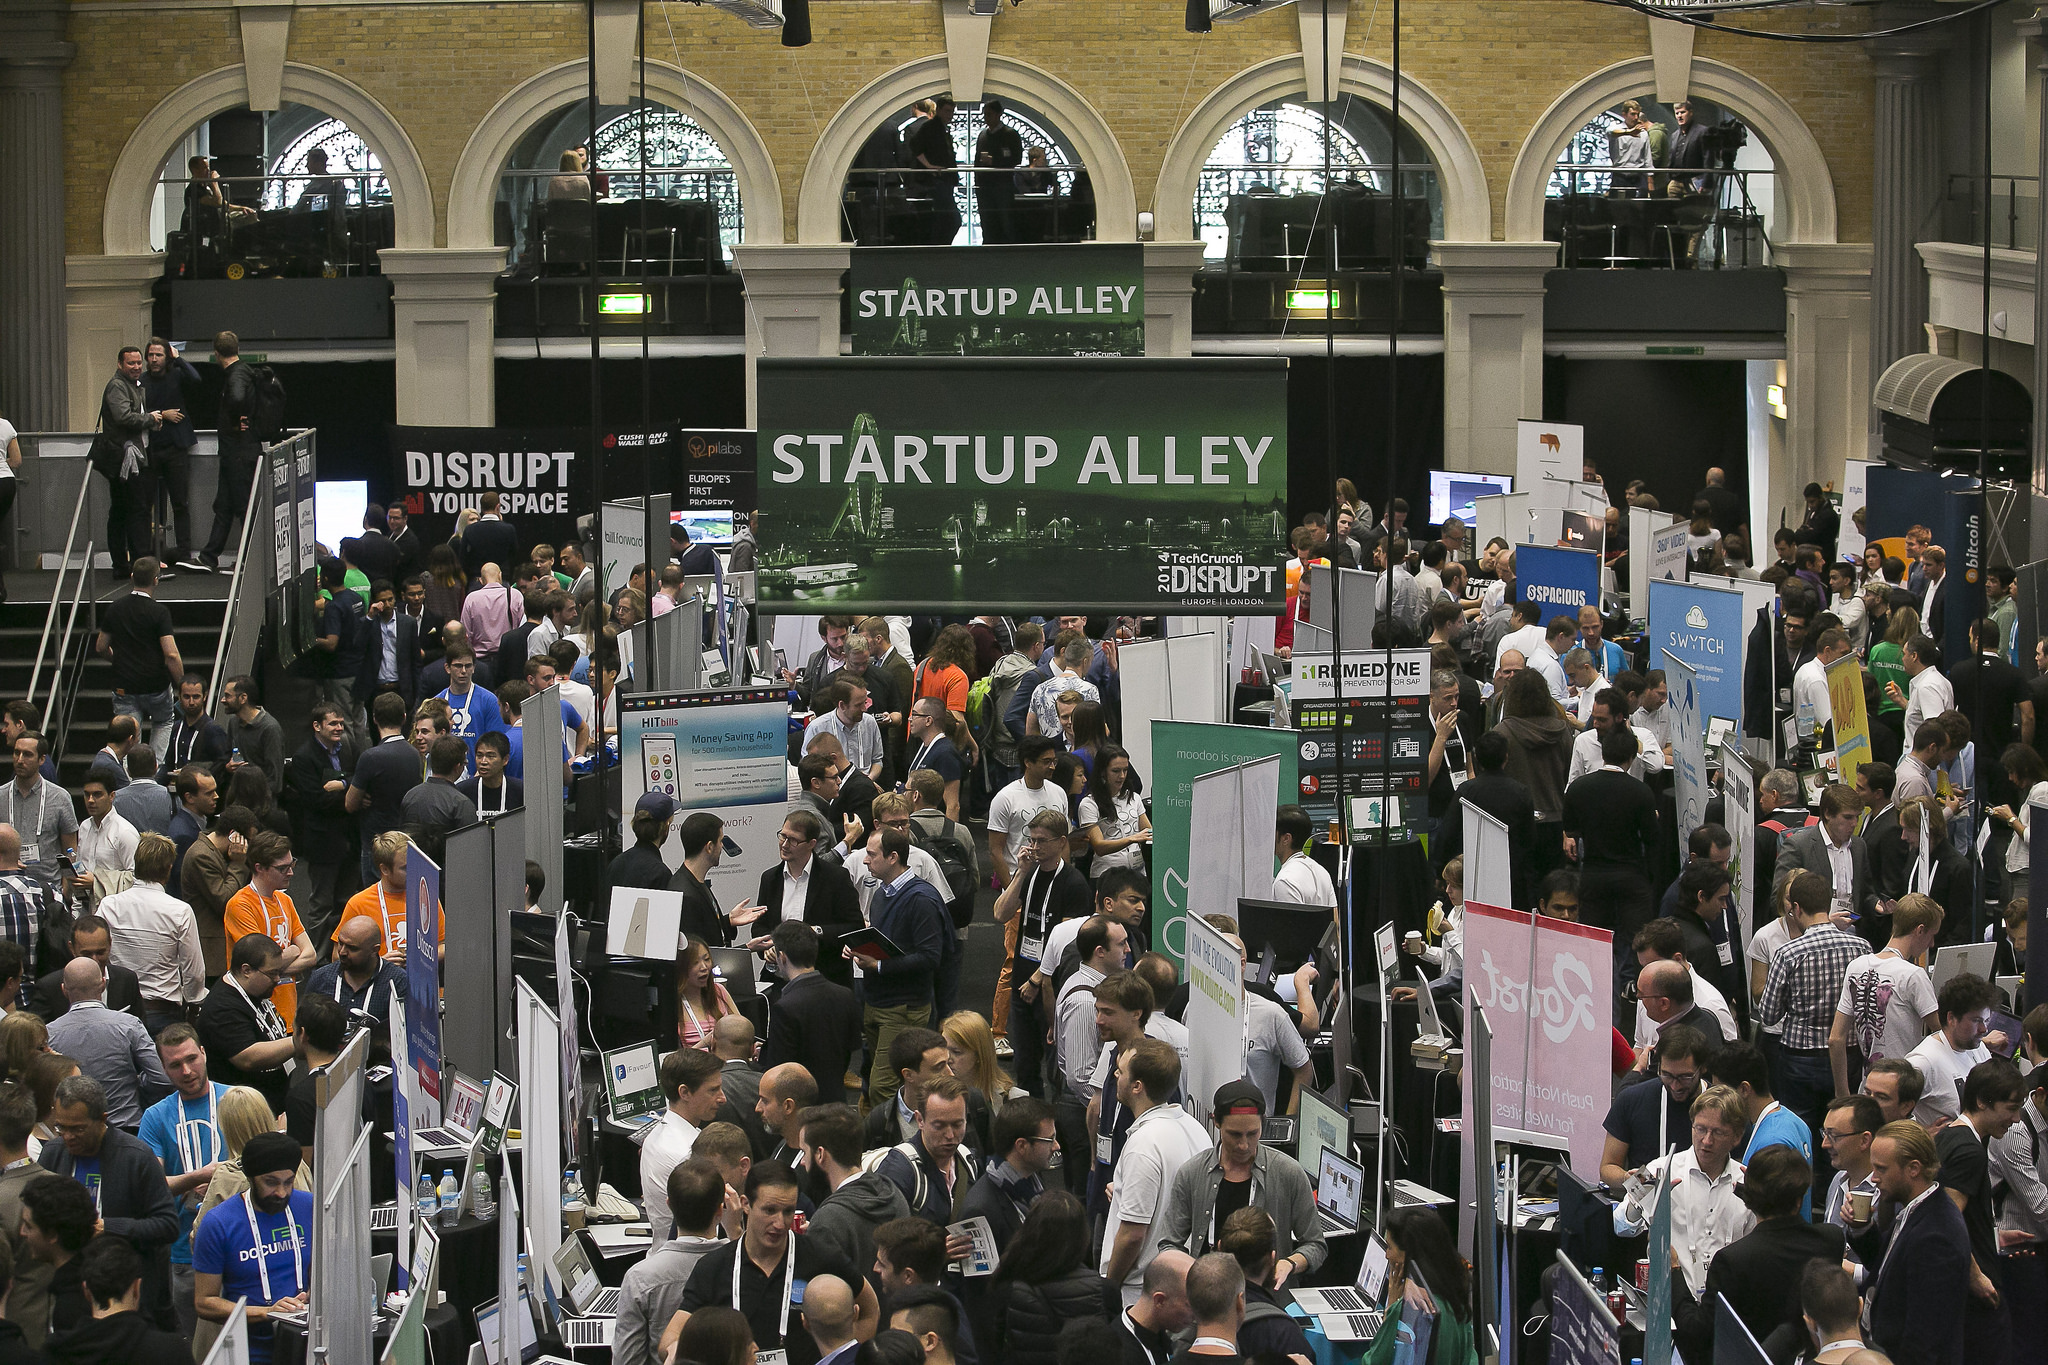 Apply today for a free exhibit table in Startup Alley at Disrupt Berlin 2017